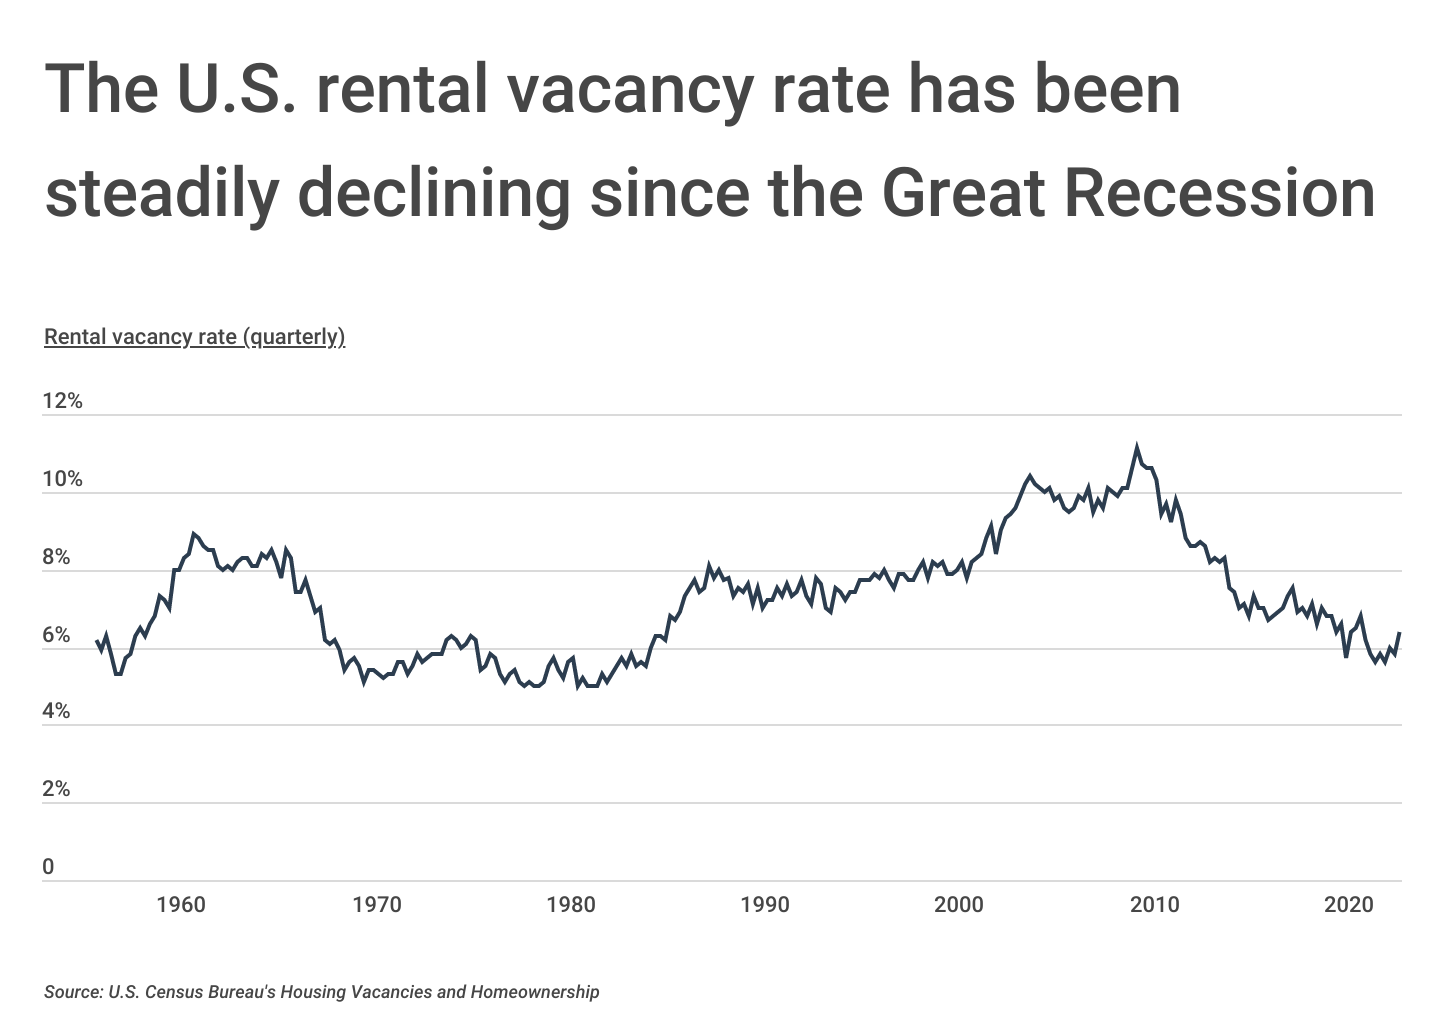 Chart1_US rental vacancy rate has been declining since the Great Recession